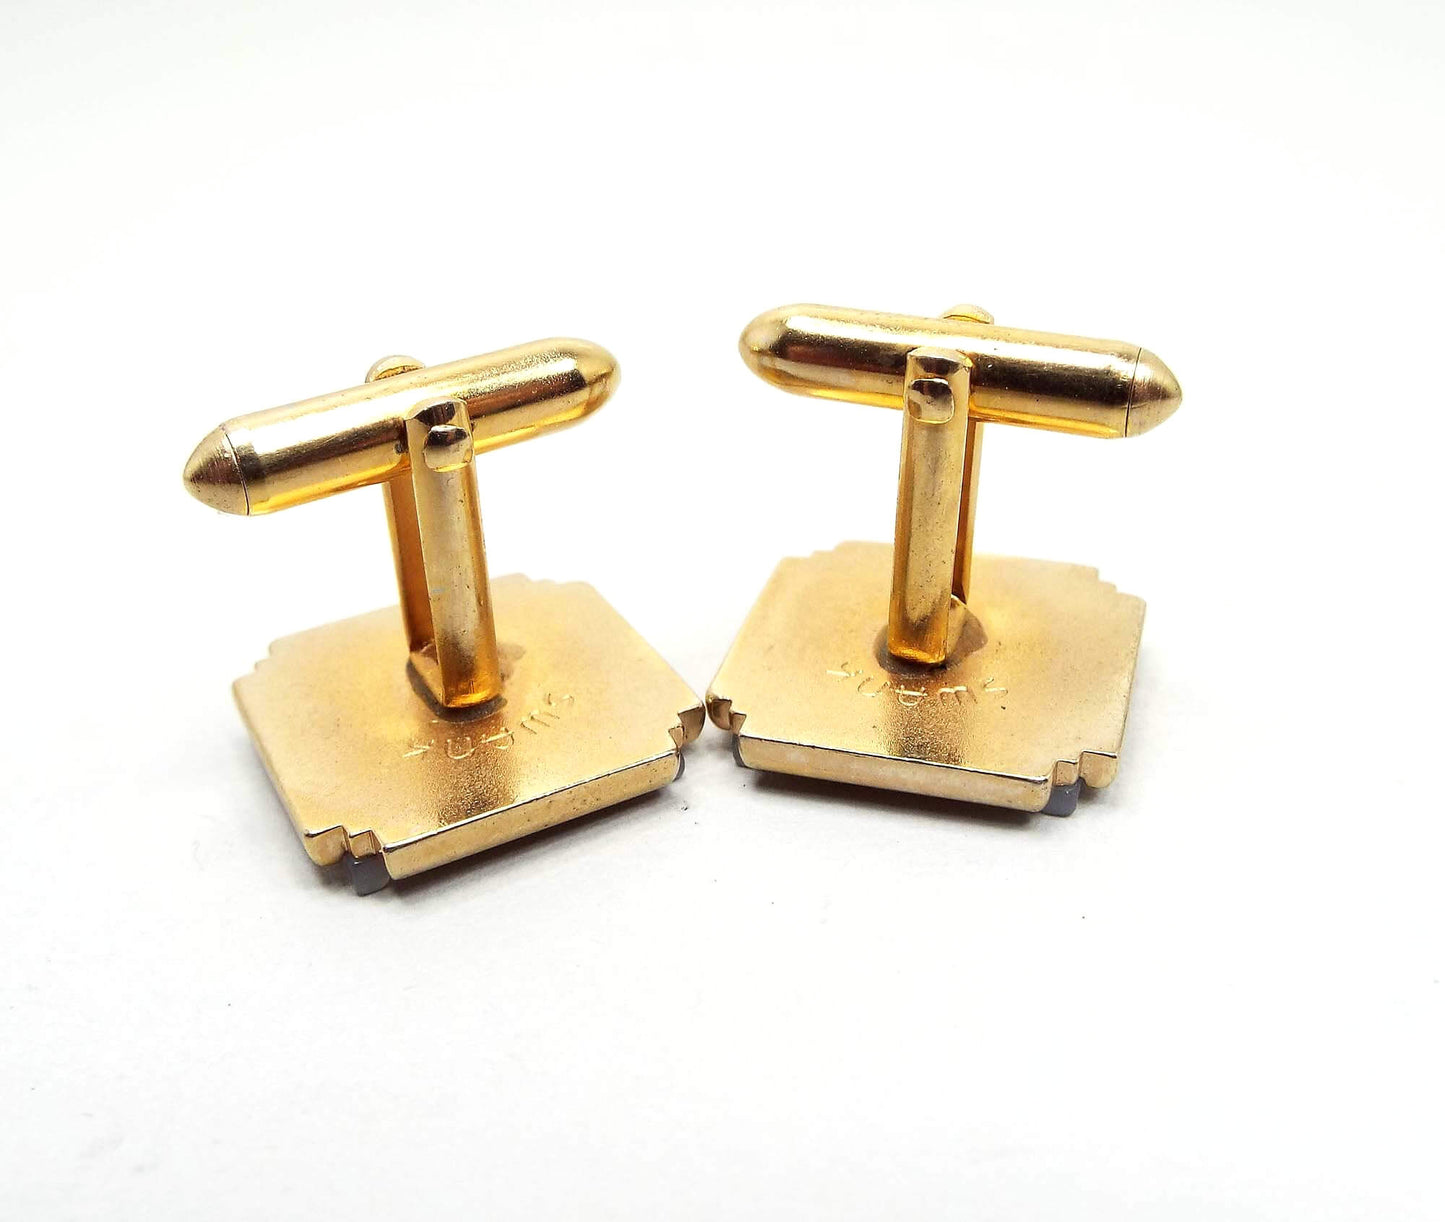 Swank Carved Mother of Pearl Vintage Cufflinks, Pearly White Cuff Links